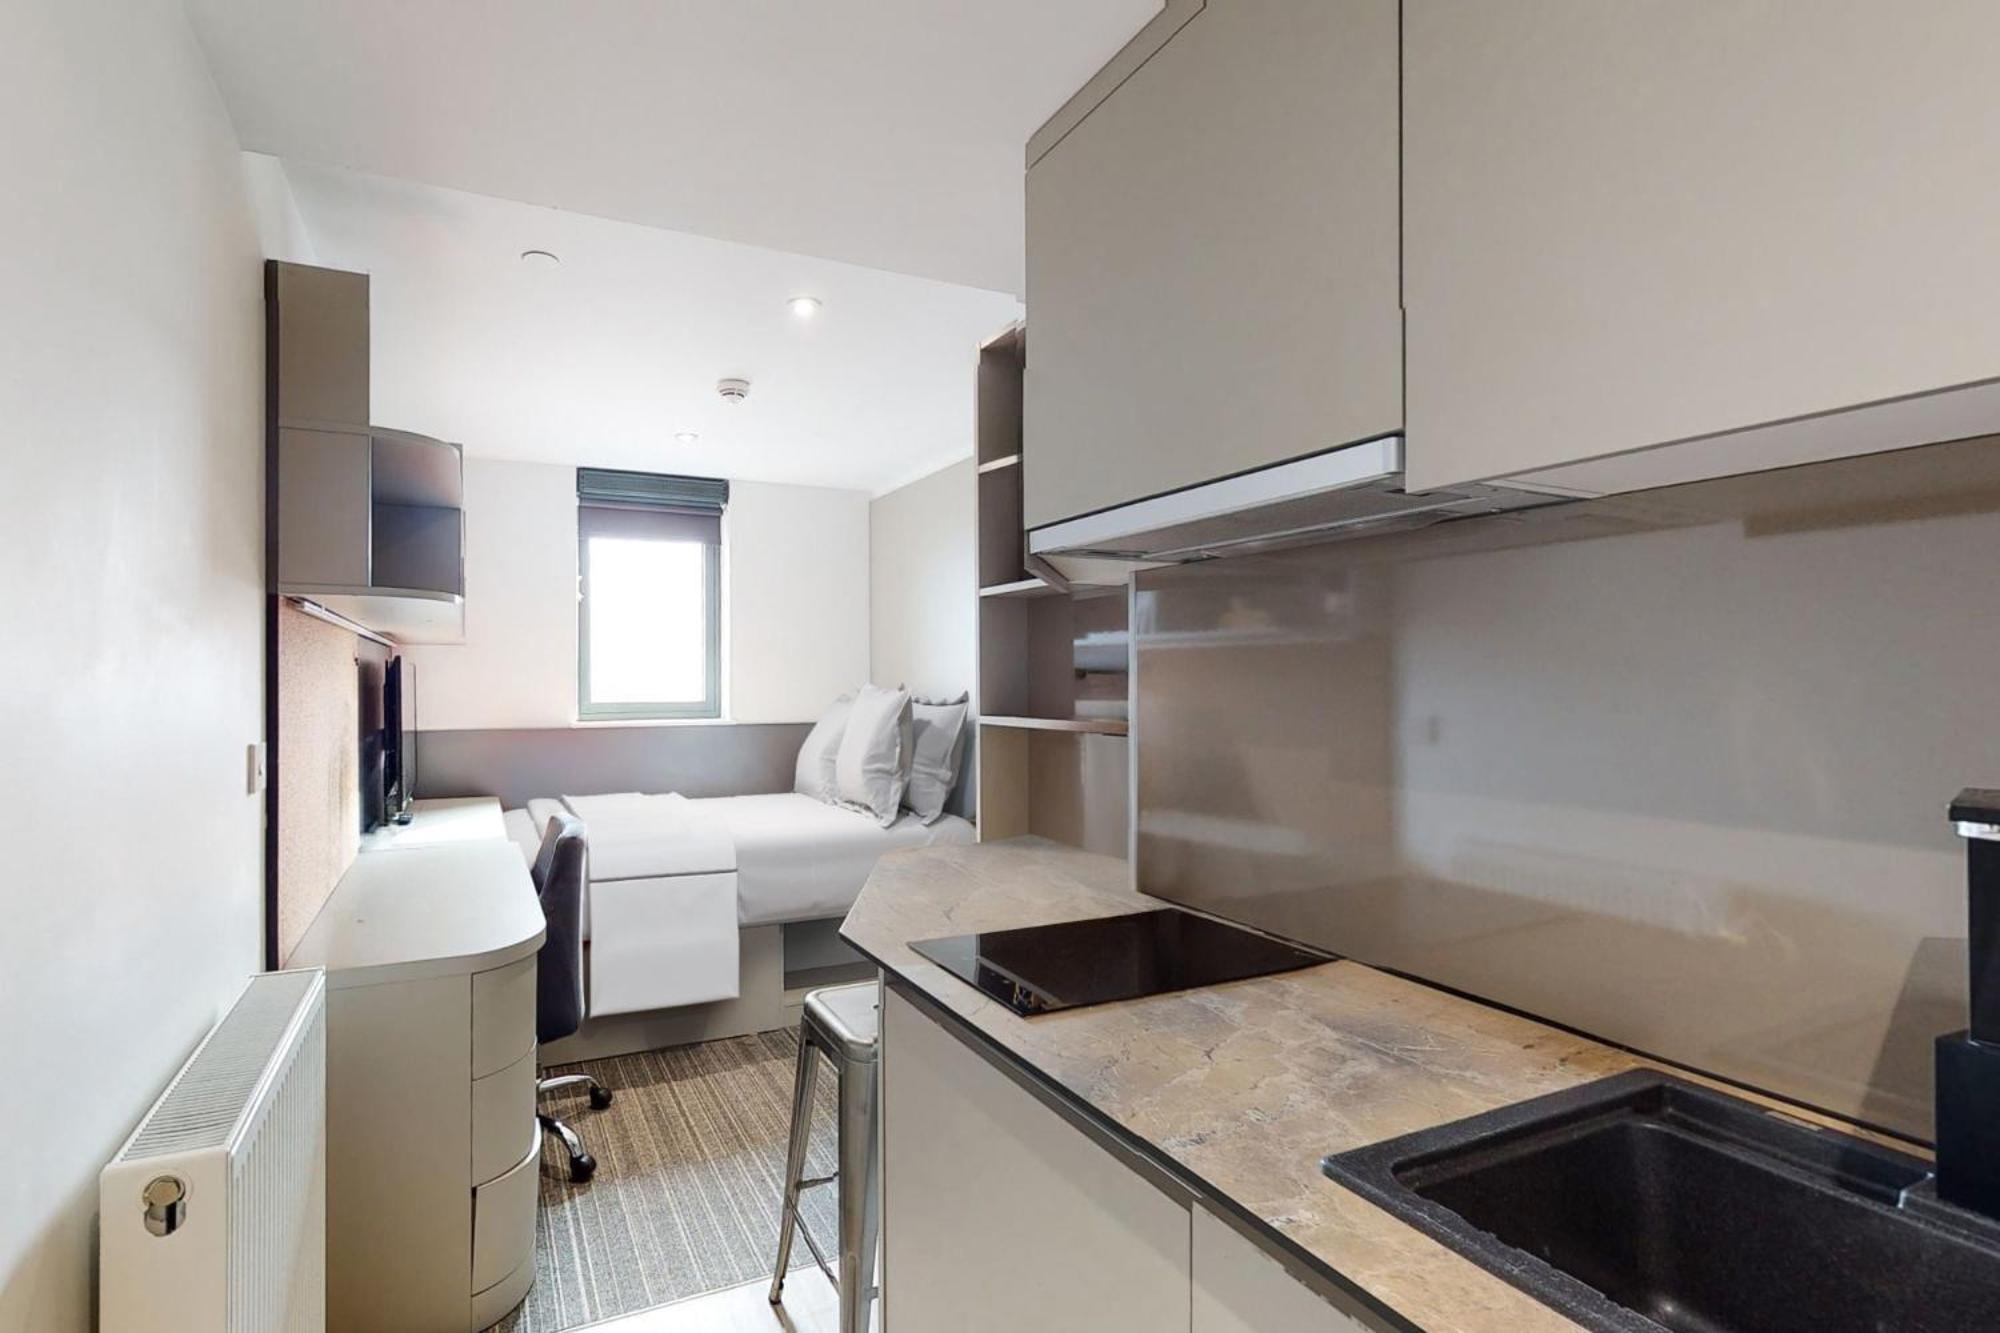 Studio Apartments And Ensuite Bedrooms With Shared Kitchen At Chapter Ealing Right Next To North Acton Tube Station 伦敦 外观 照片